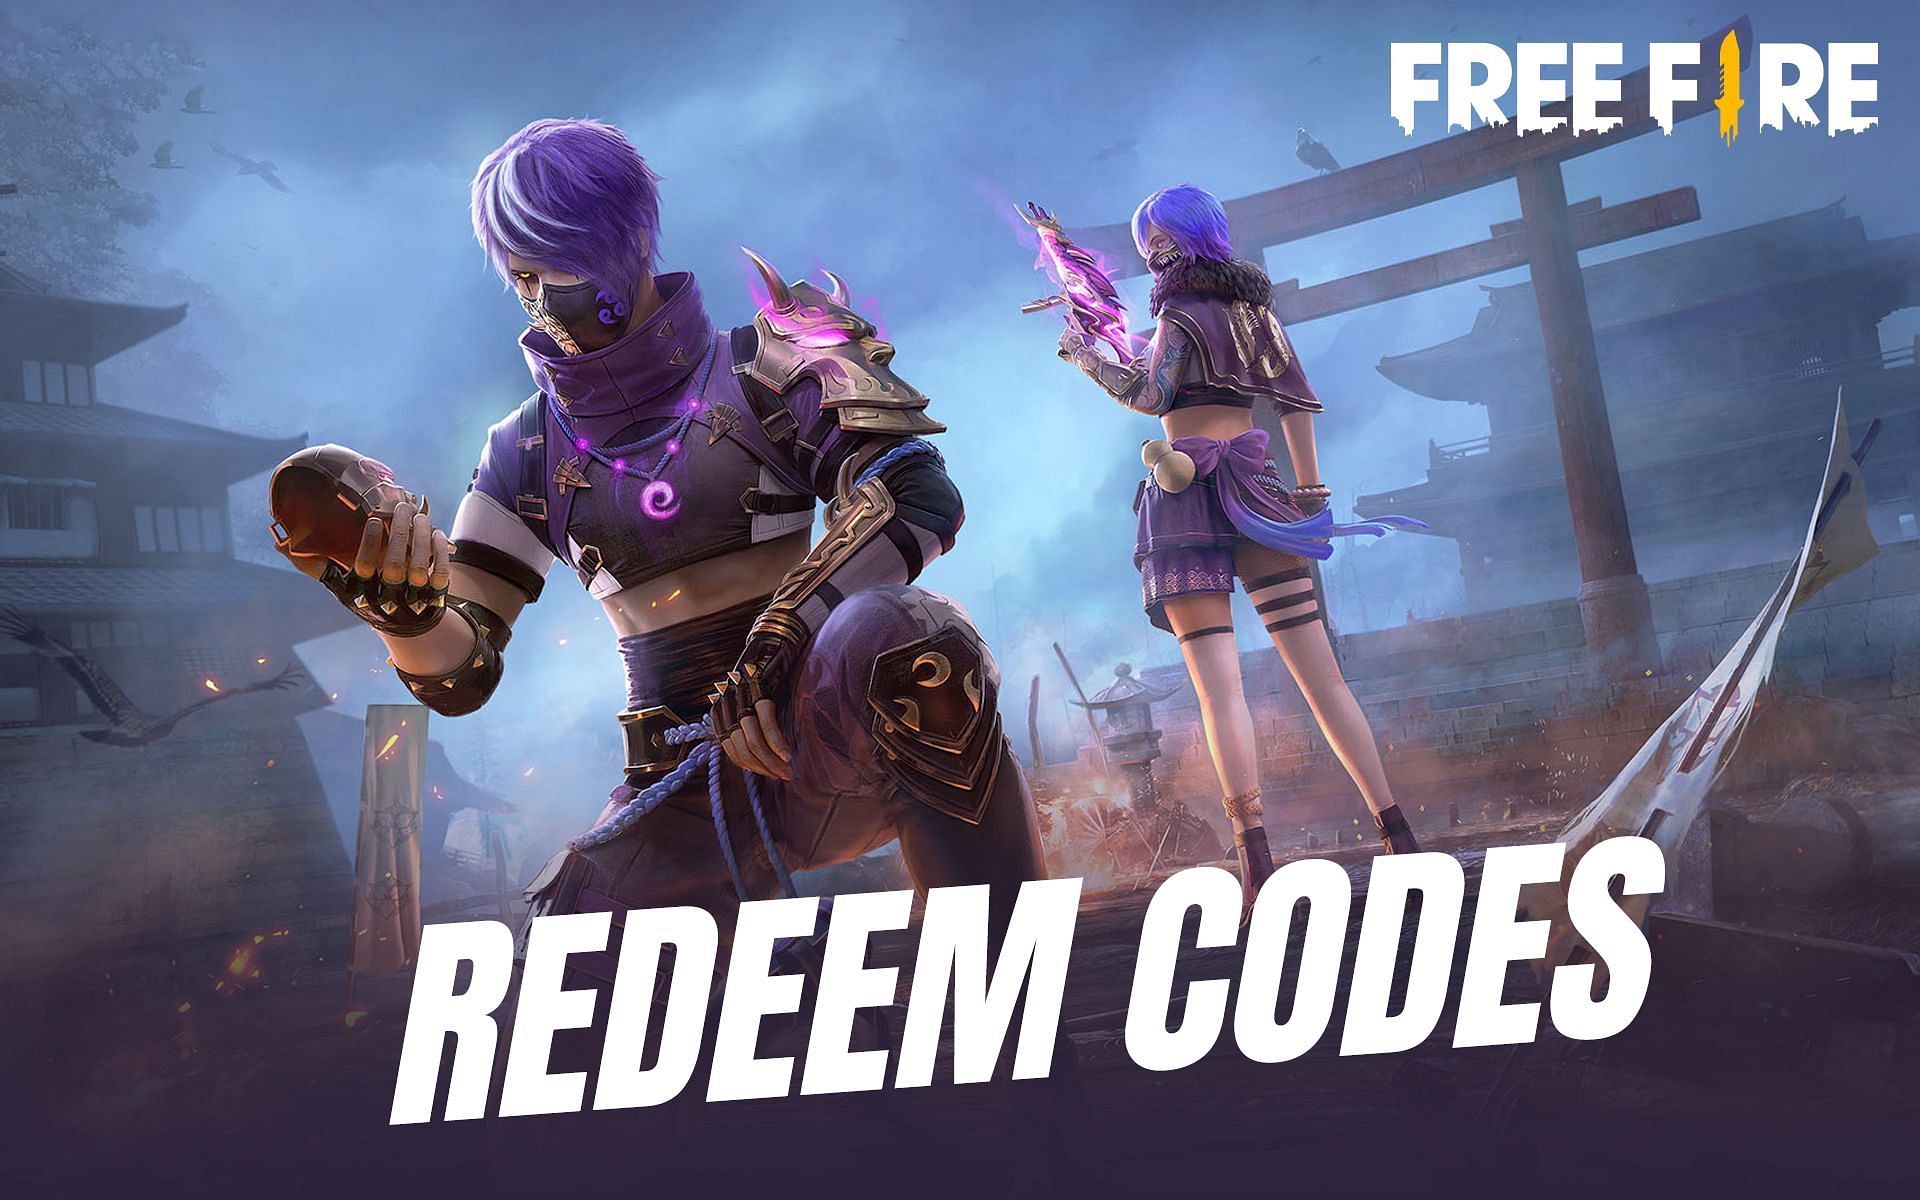 Lot of players are interested in Free Fire rewards (Image via Garena)